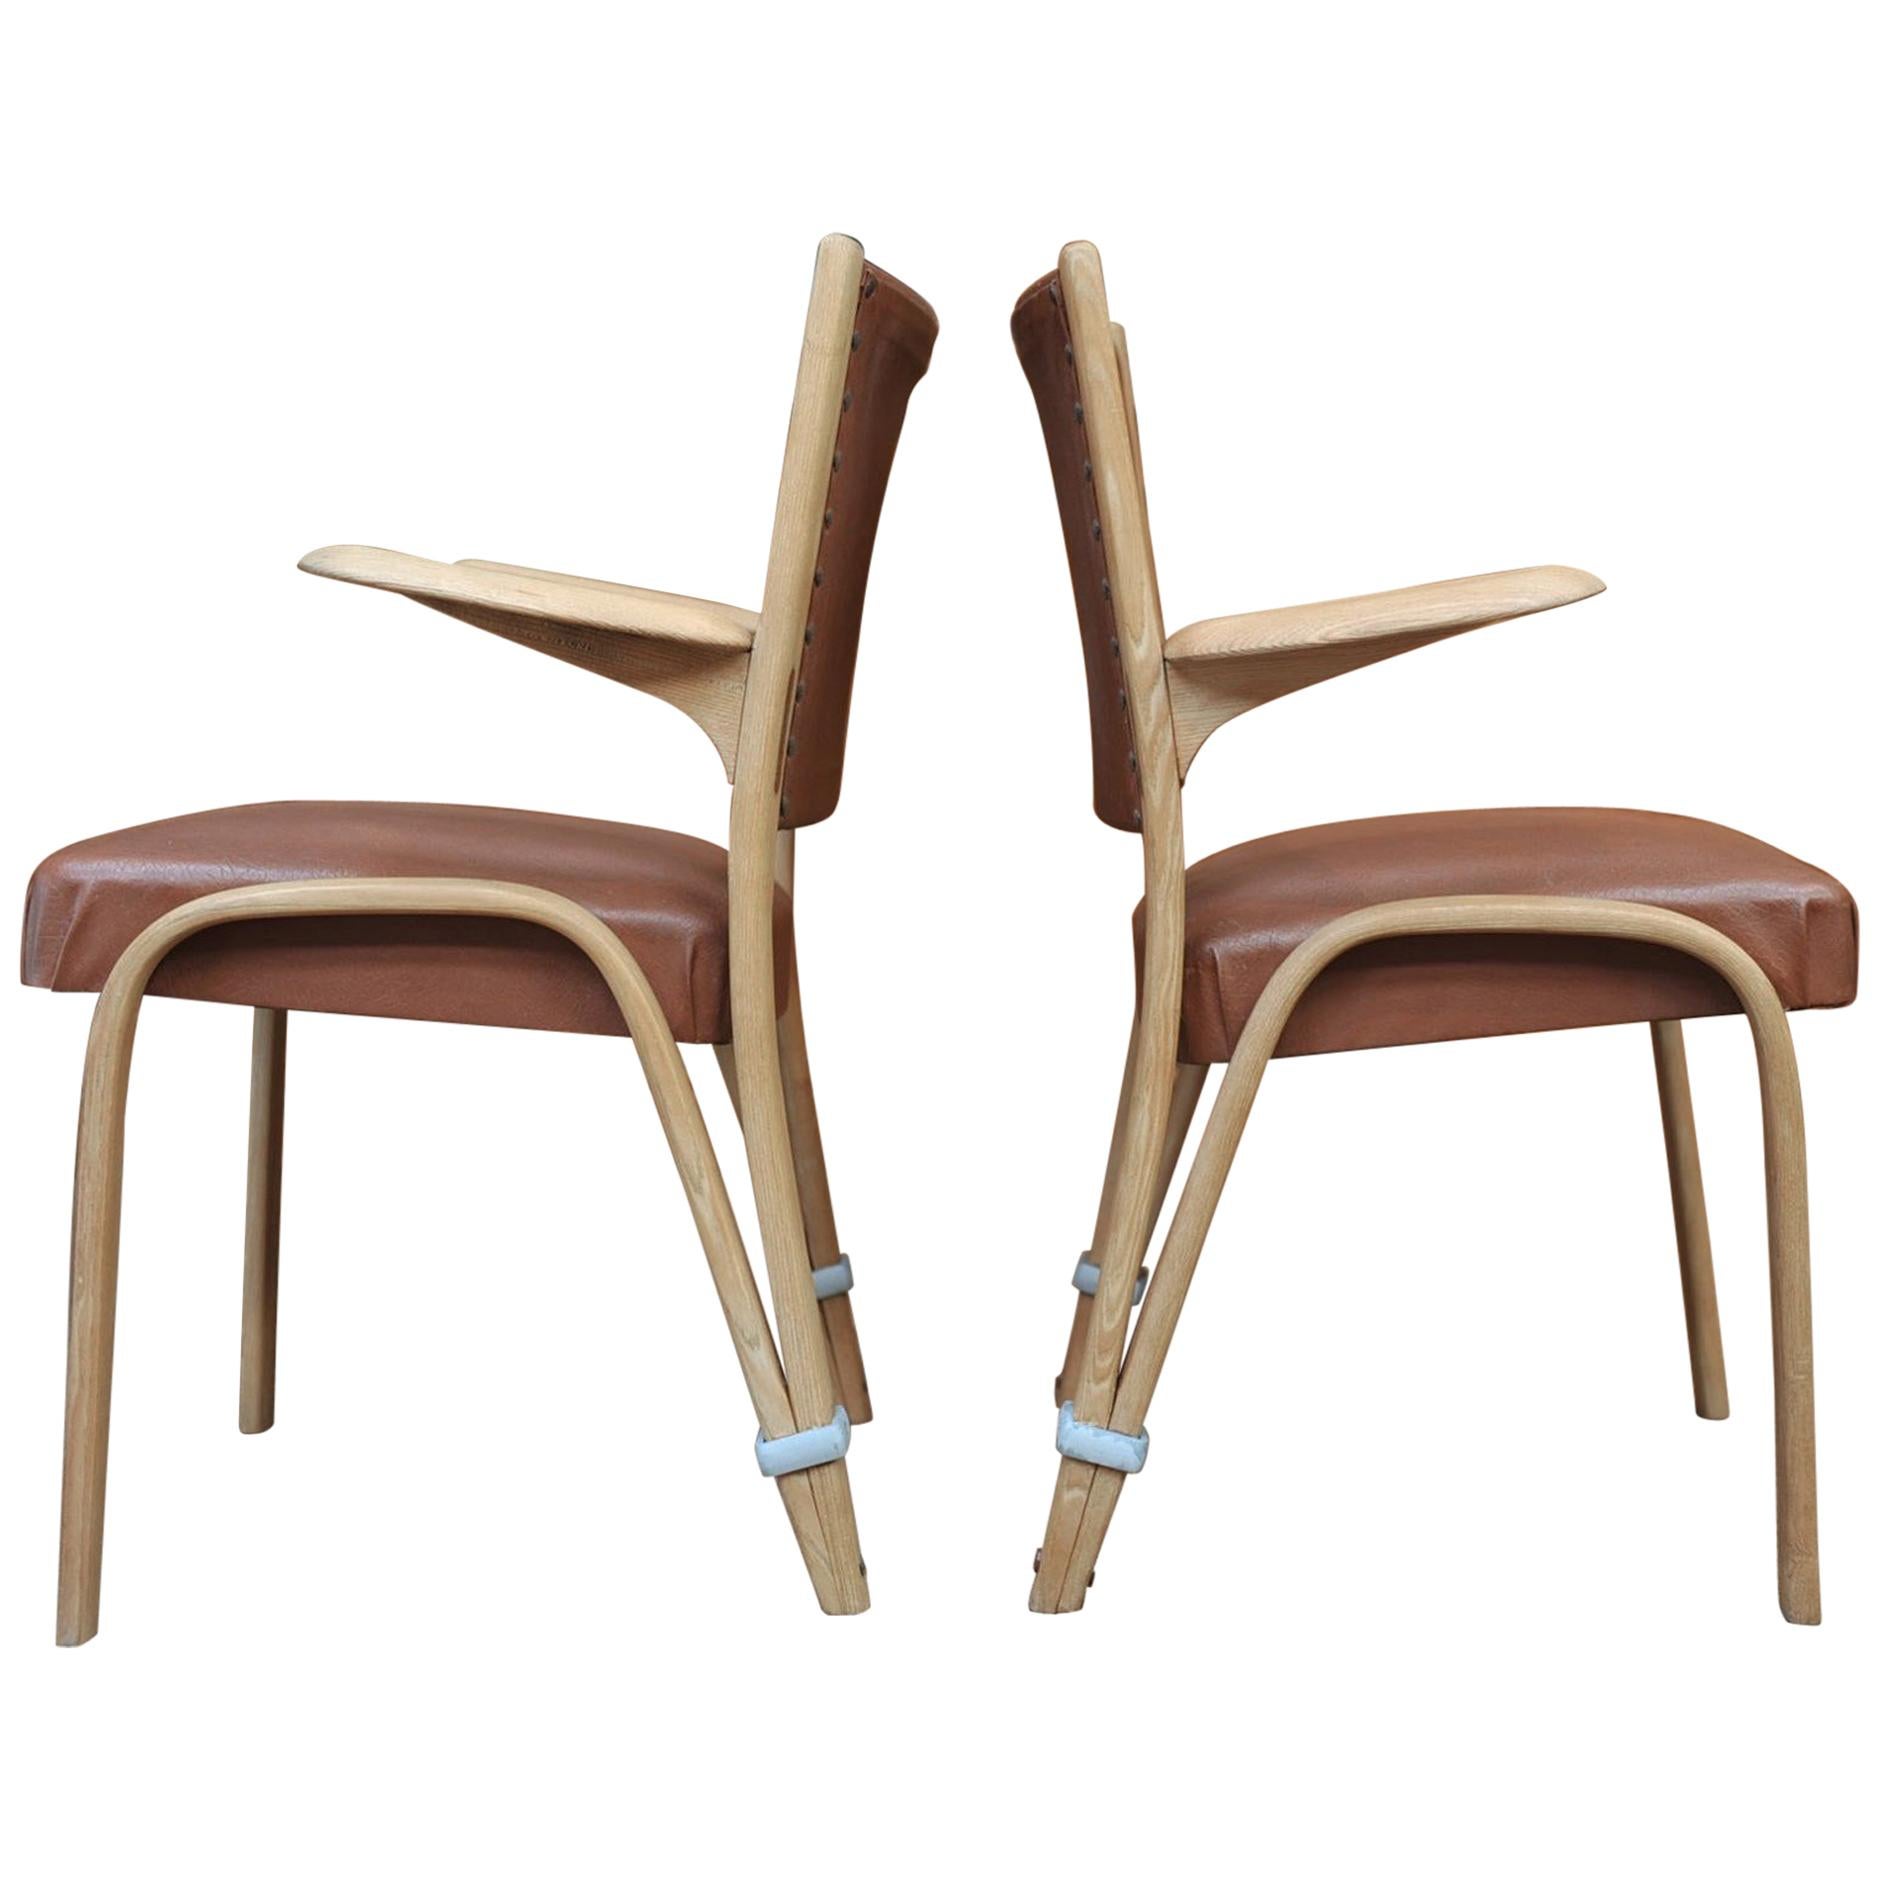 Set of Four Elm Wood Chairs by Bow Wood France, circa 1950 For Sale